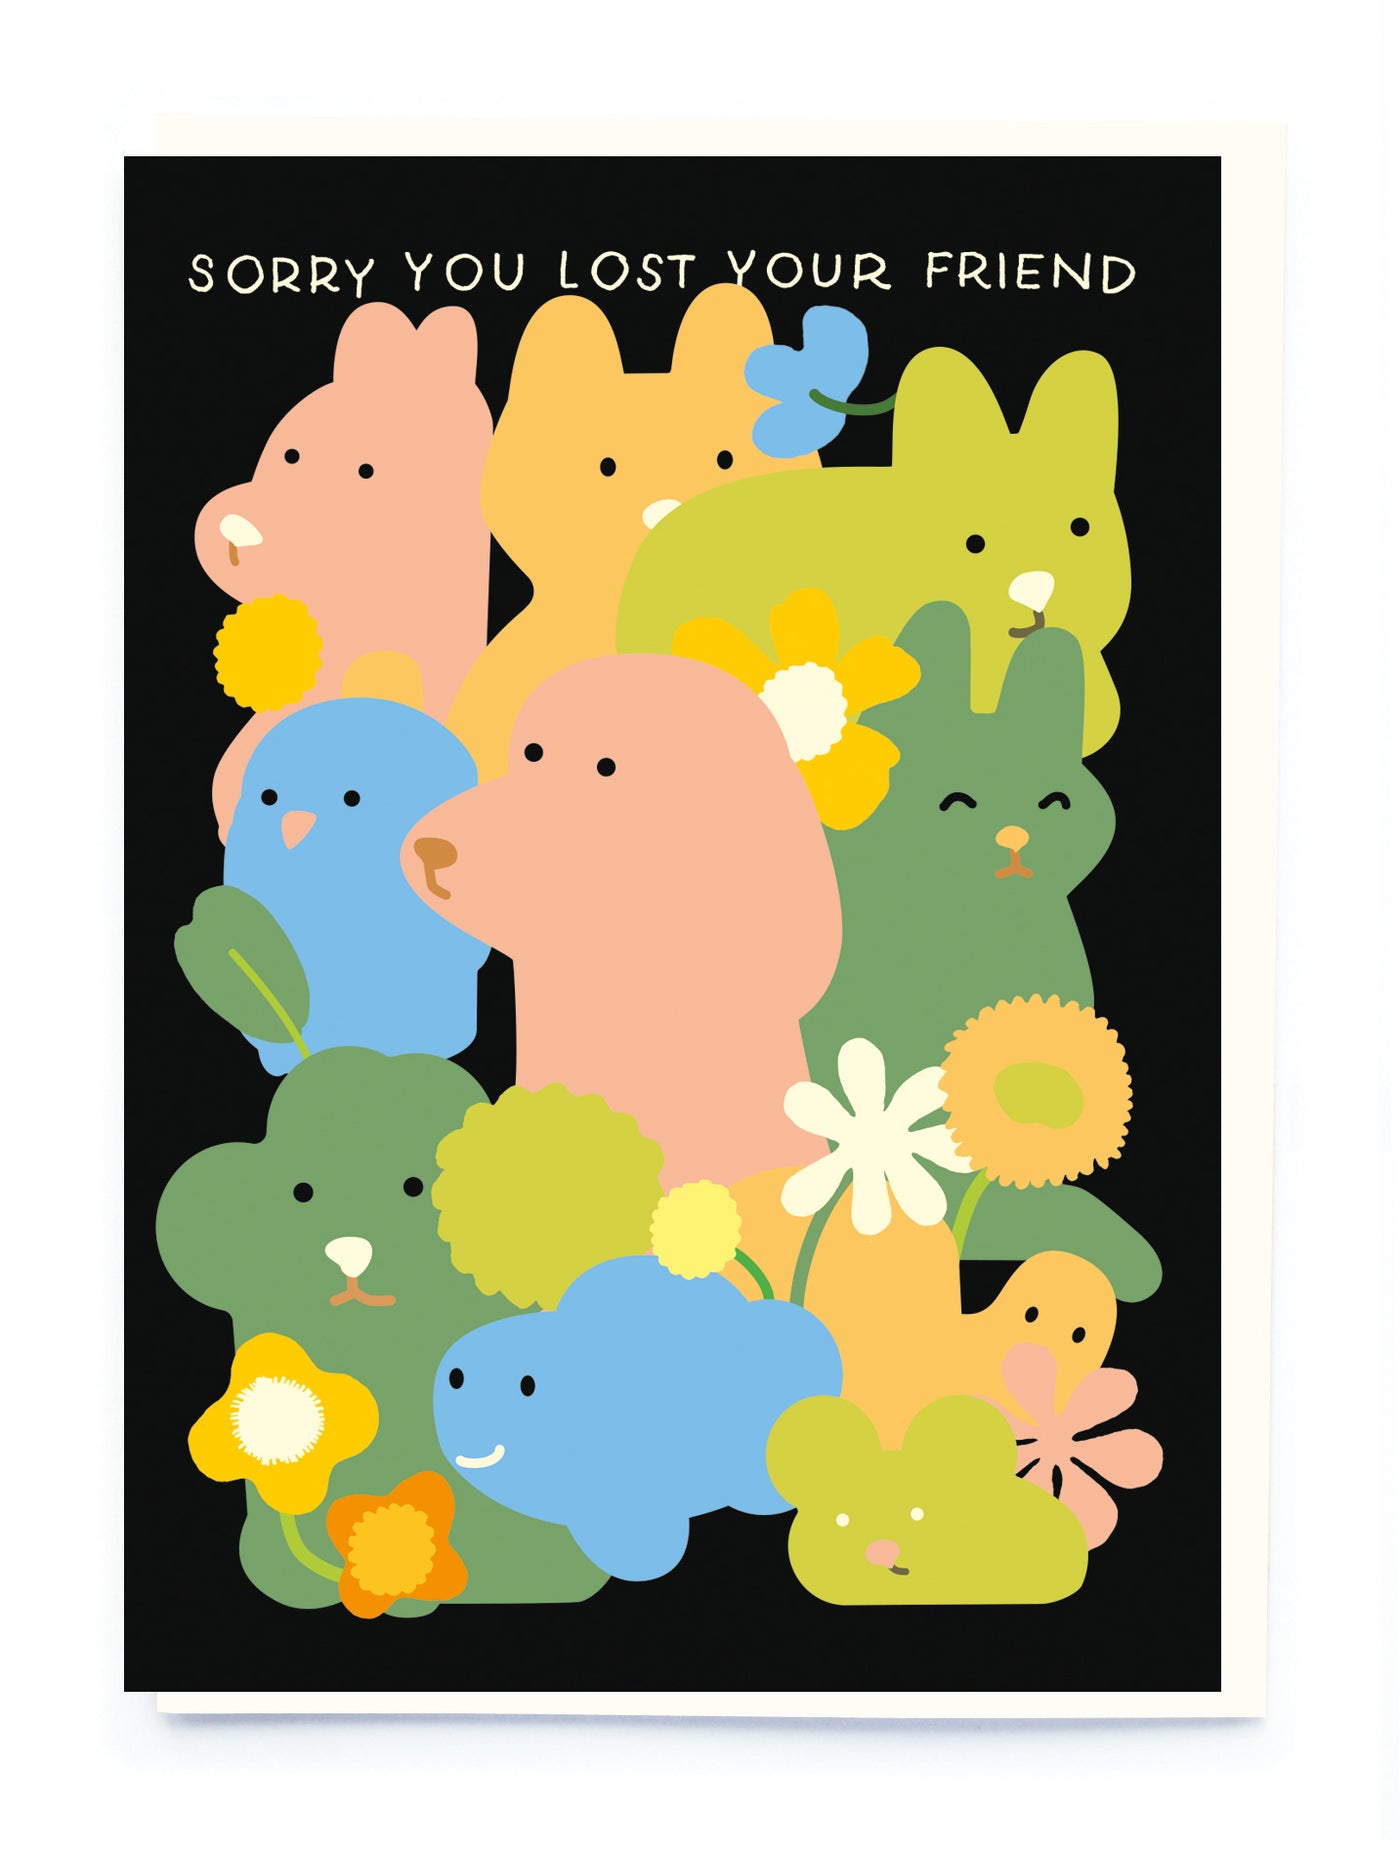 Sorry you lost your friend Greetings card